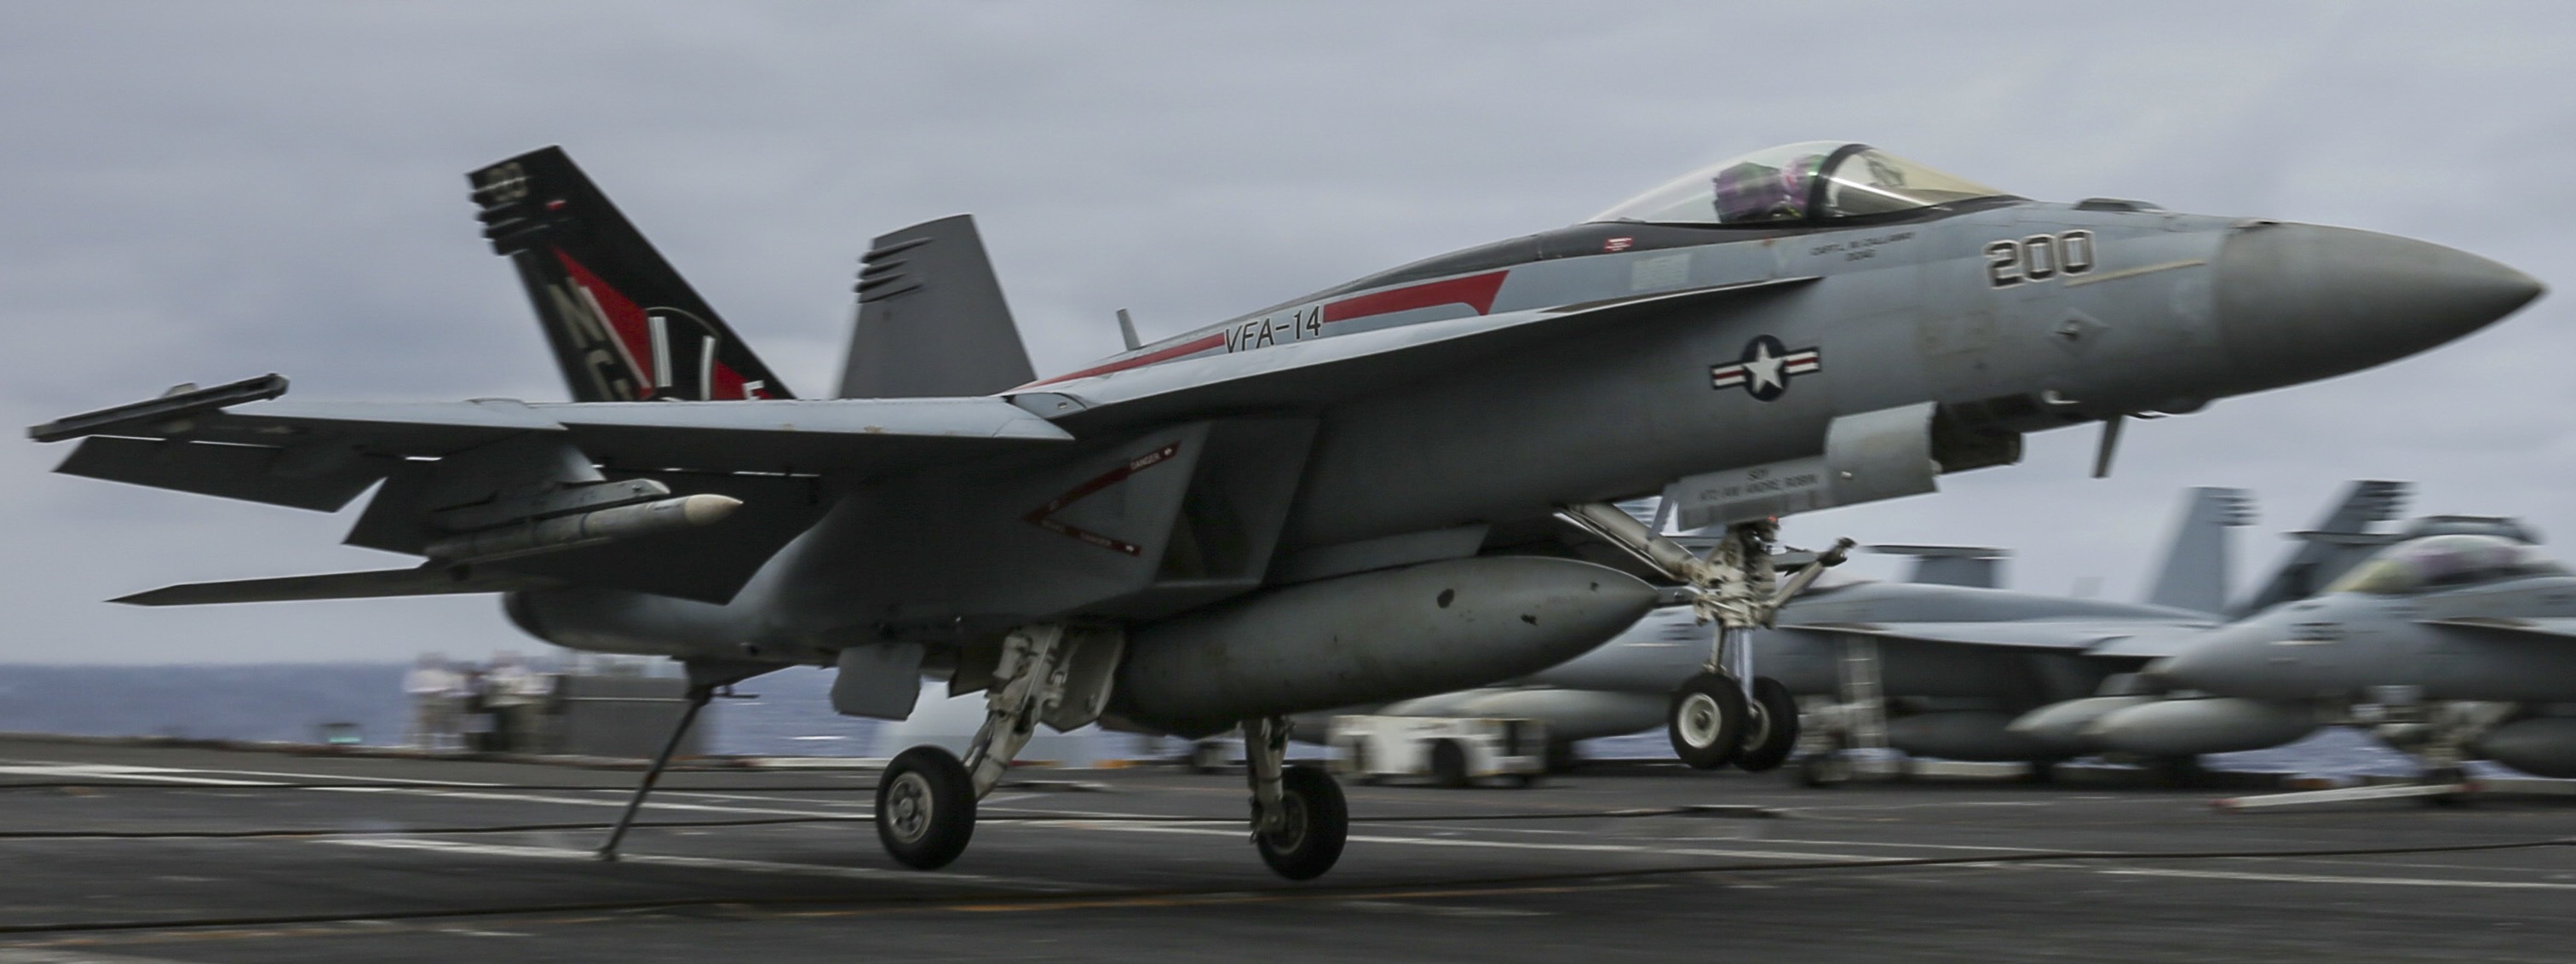 vfa-14 tophatters strike fighter squadron f/a-18e super hornet cvn-72 uss abraham lincoln cvw-9 us navy 56